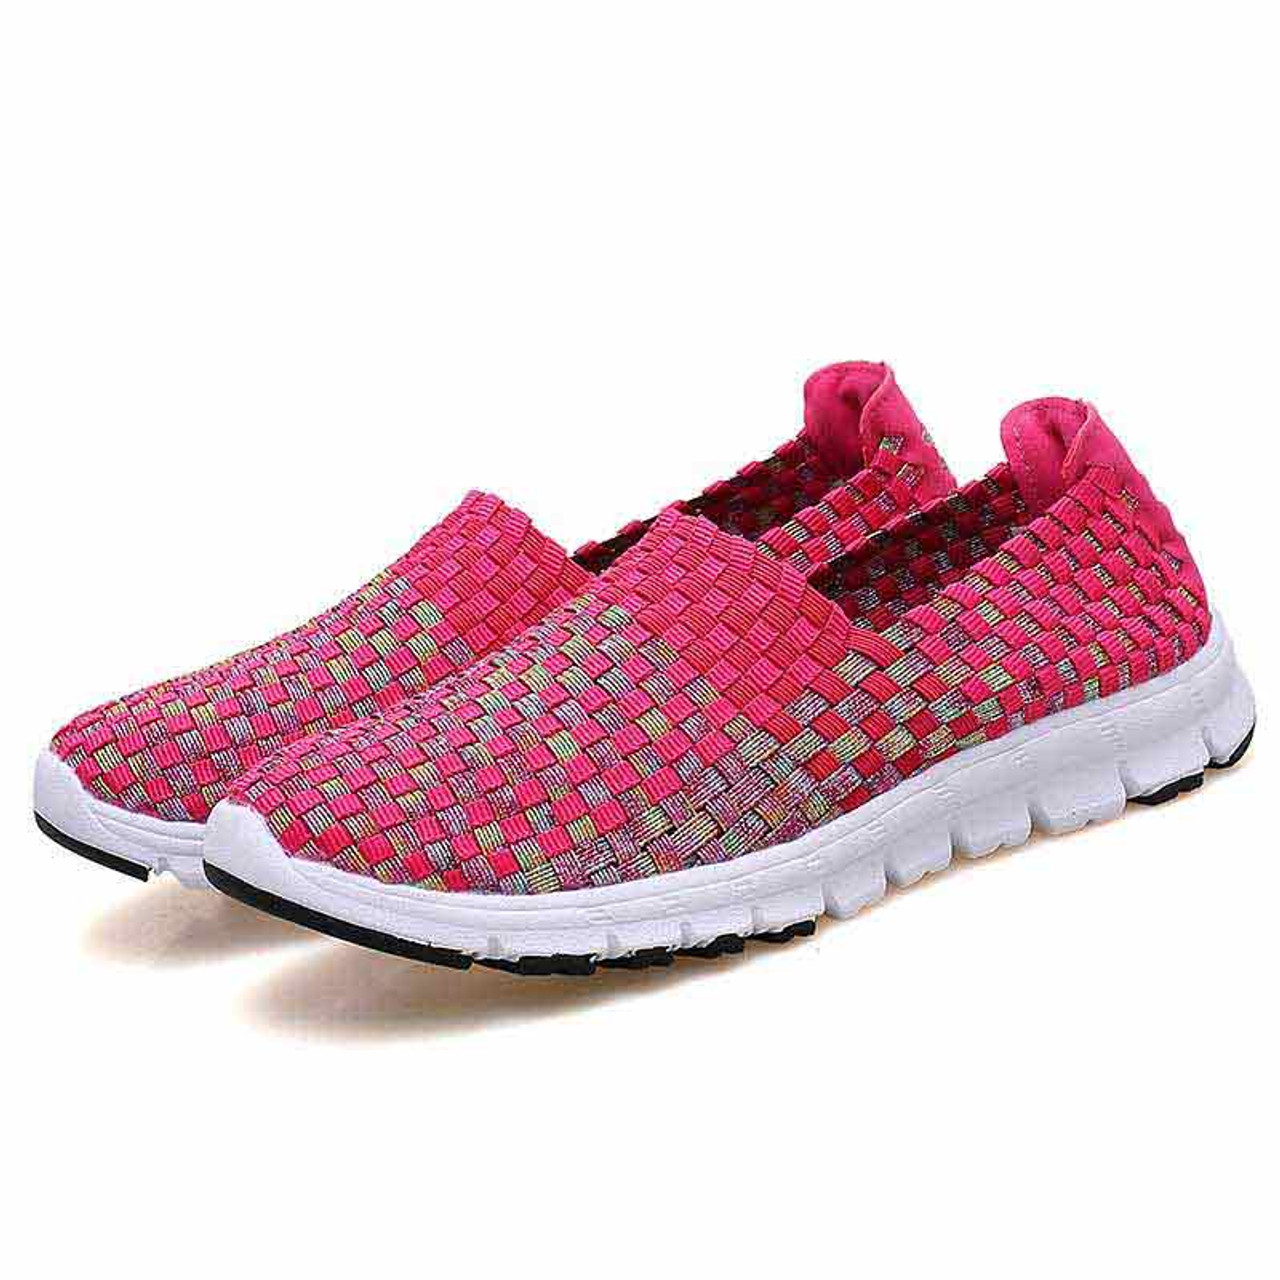 Red knit check slip on shoe sneaker | Womens sneakers shoes online 1851WS